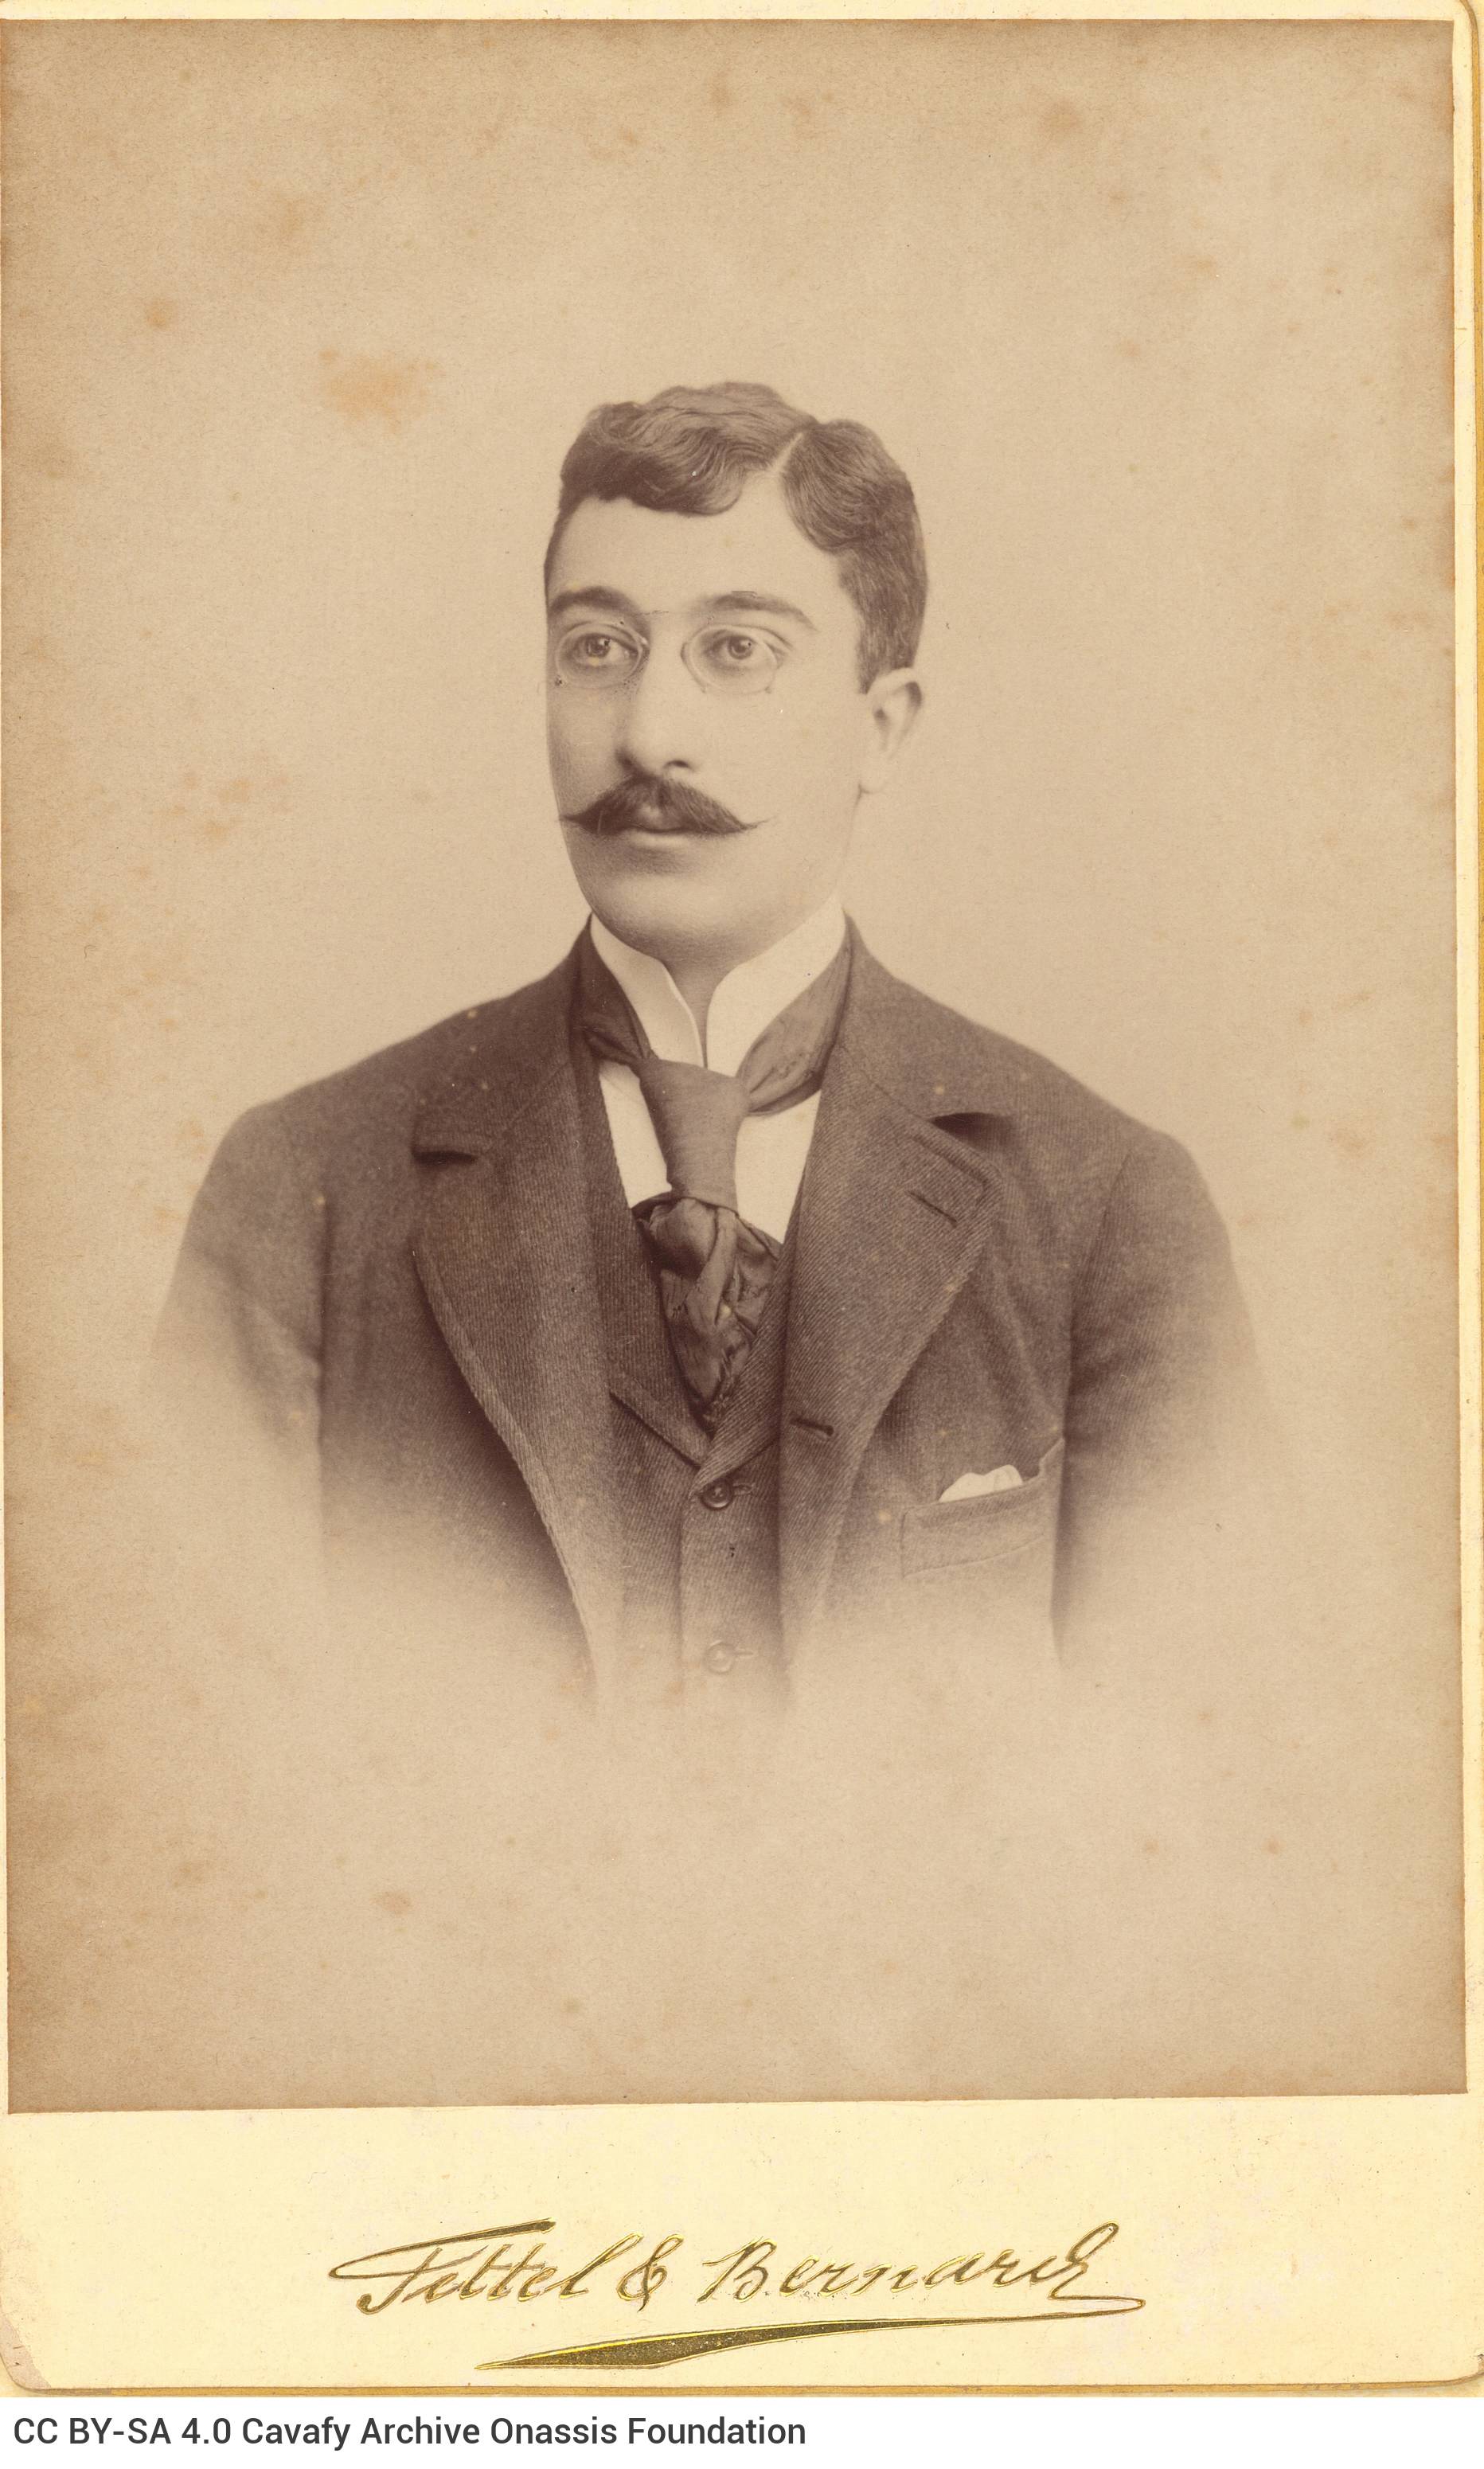 Photographic portrait of Cavafy by the photo shop of Fettel & Bernard in Alexandria, in two copies. The poet has a mustache, 